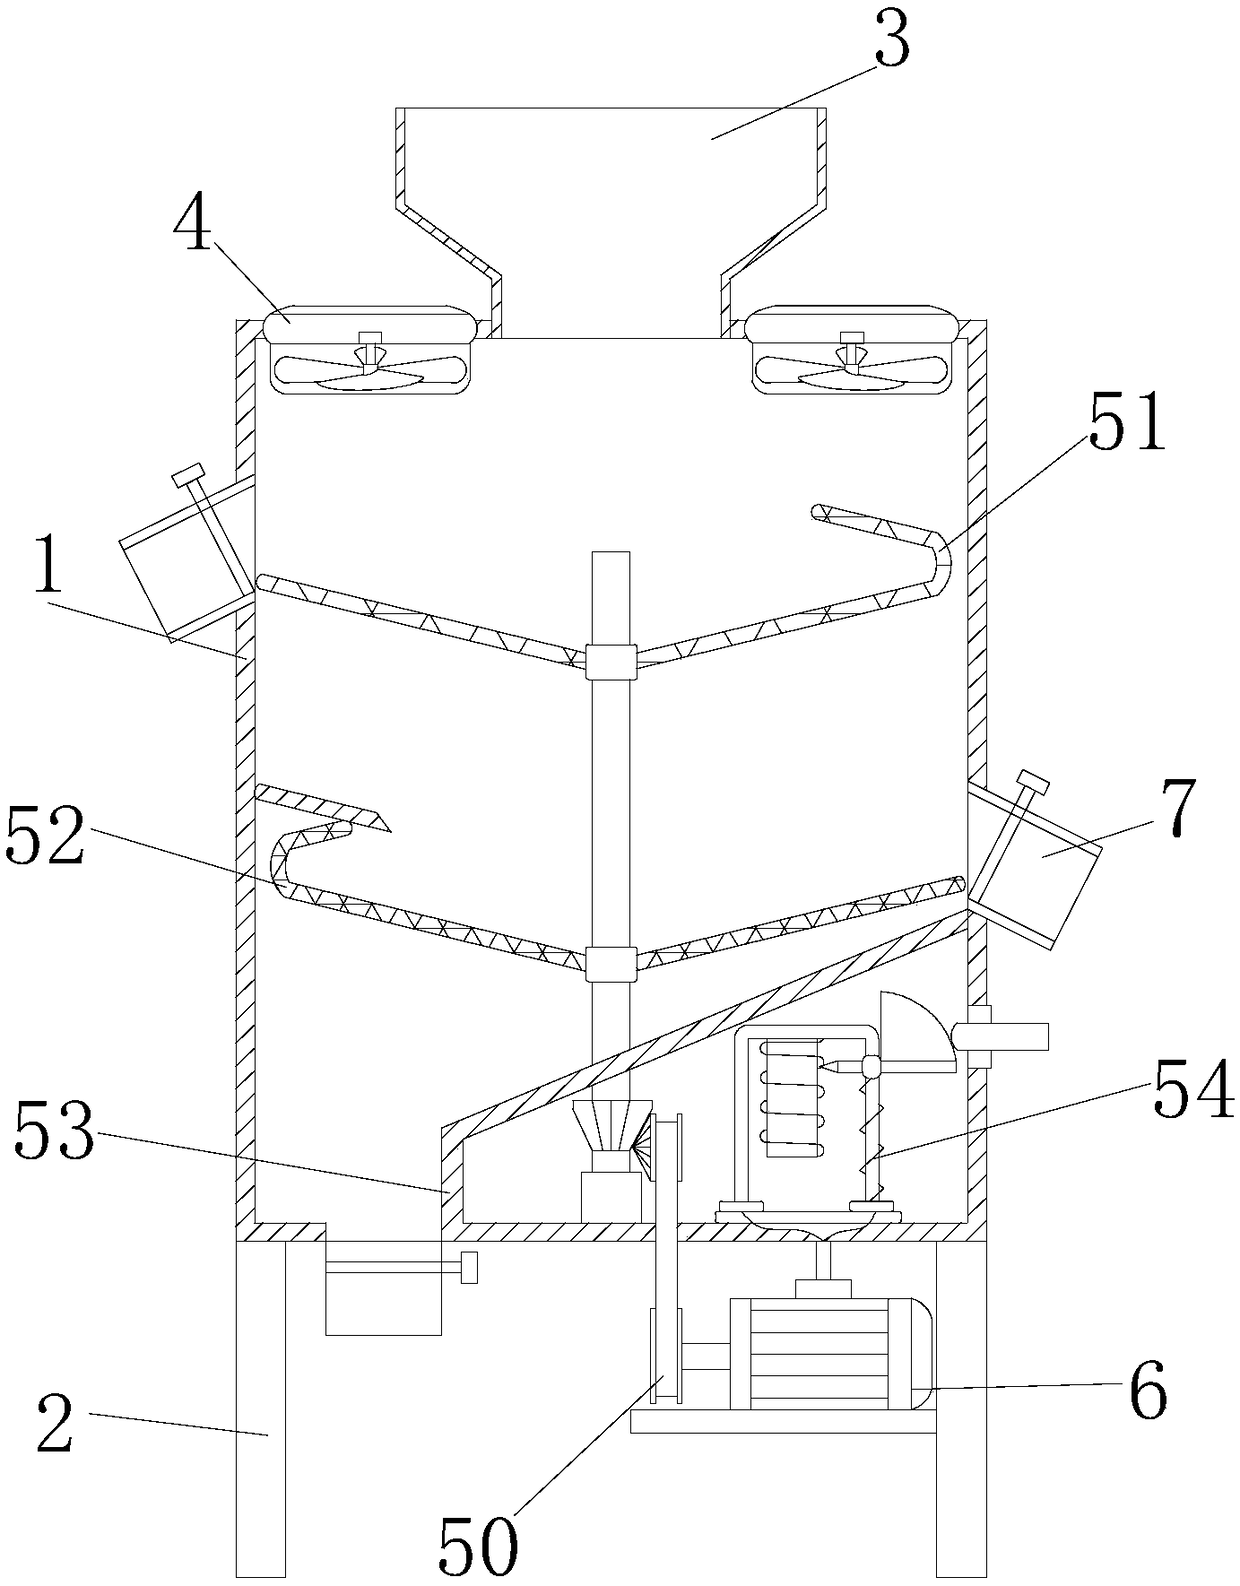 Tea leaf processing device utilizing centrifugal force for screening and discharging